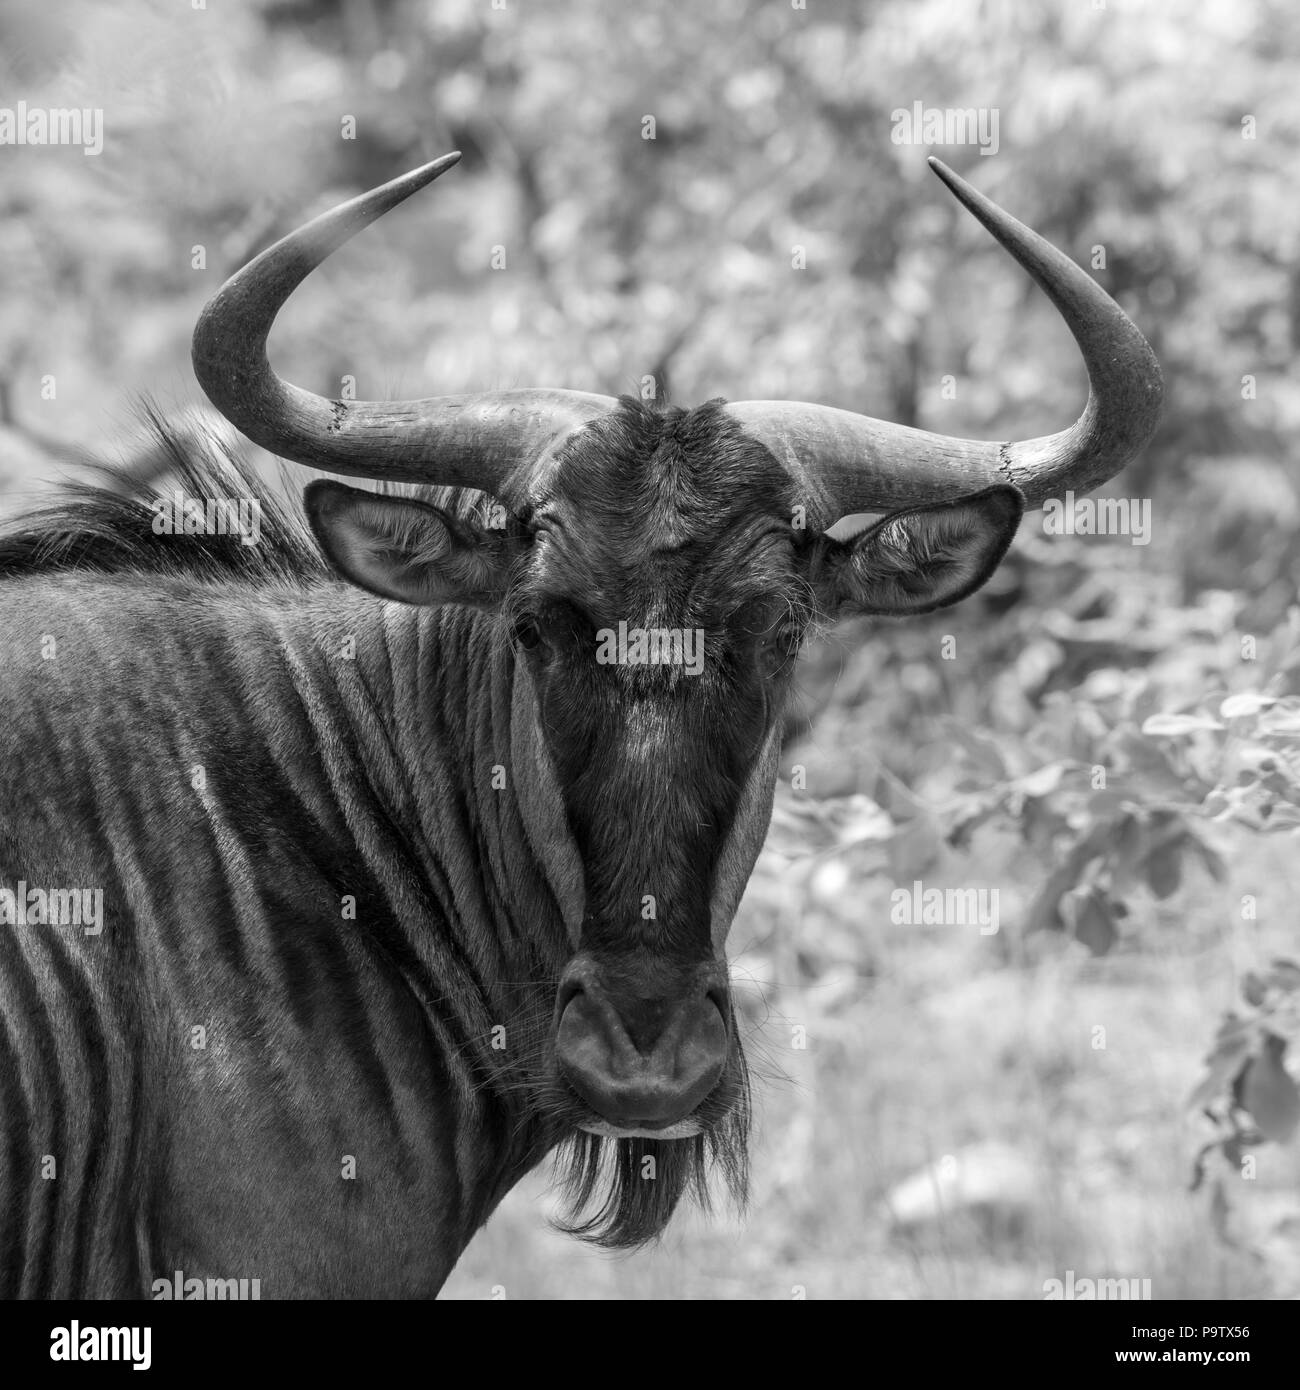 A blue wildebeest (Connochaetes taurinus) in the south African bush Stock Photo